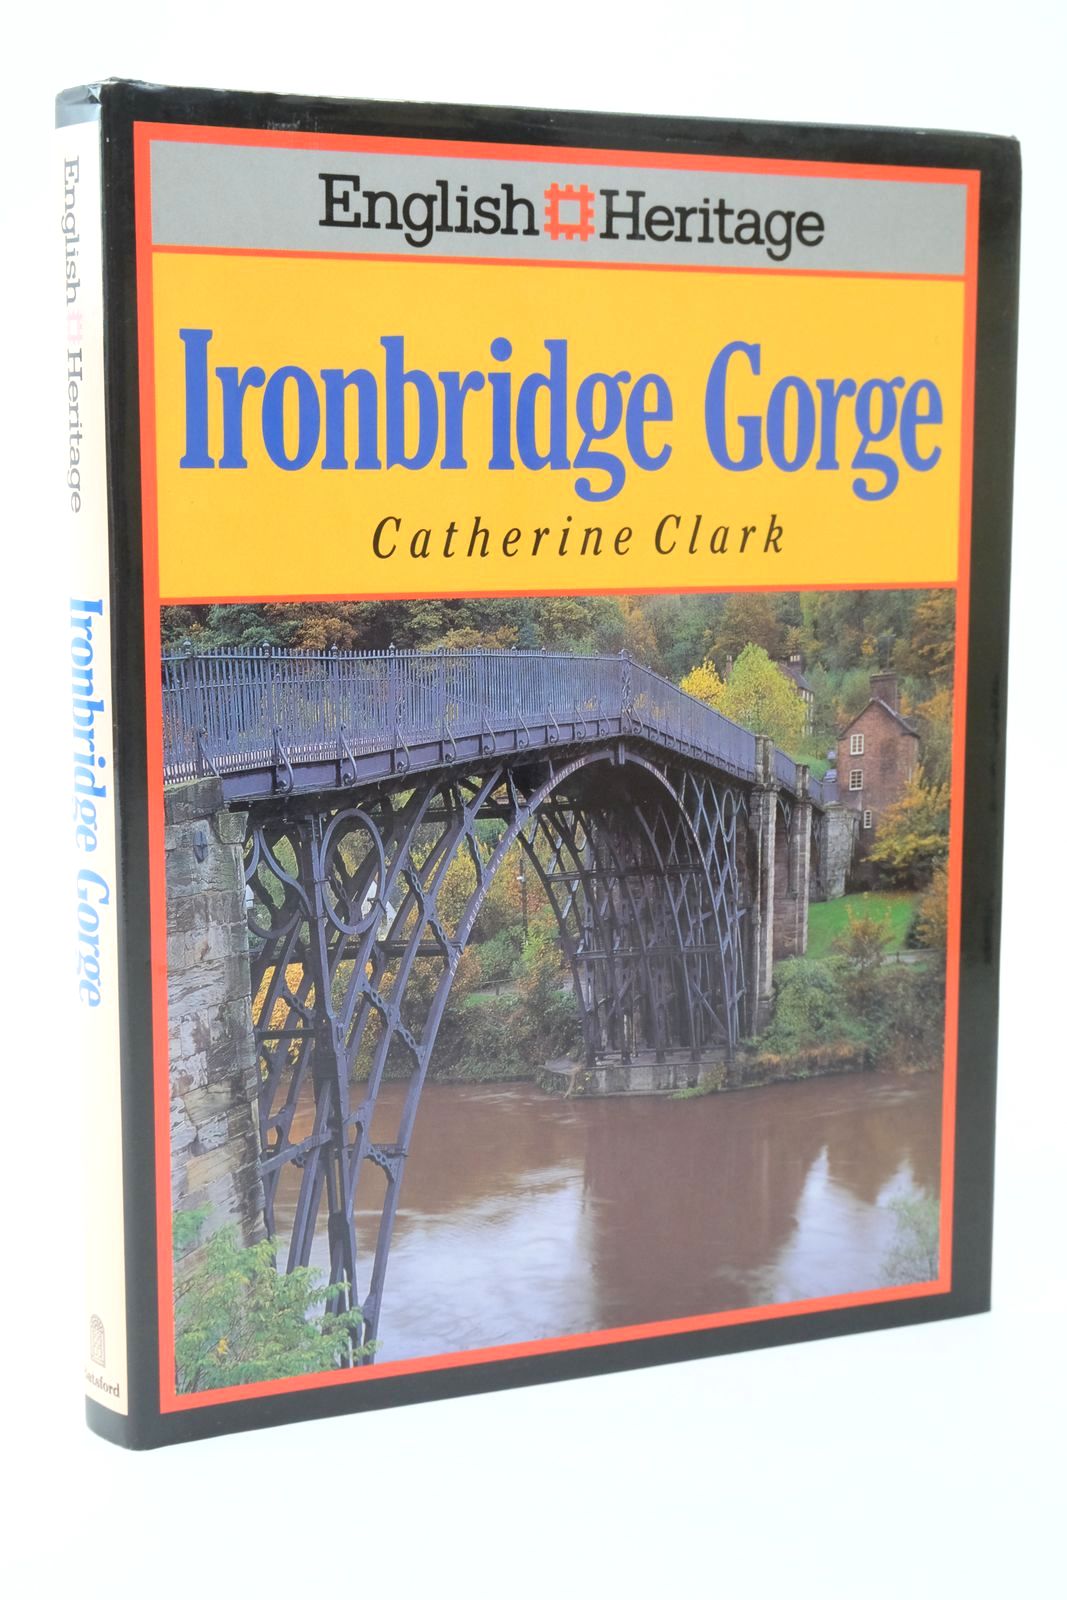 Photo of IRON BRIDGE GORGE written by Clark, Catherine published by B.T. Batsford, English Heritage (STOCK CODE: 1322491)  for sale by Stella & Rose's Books